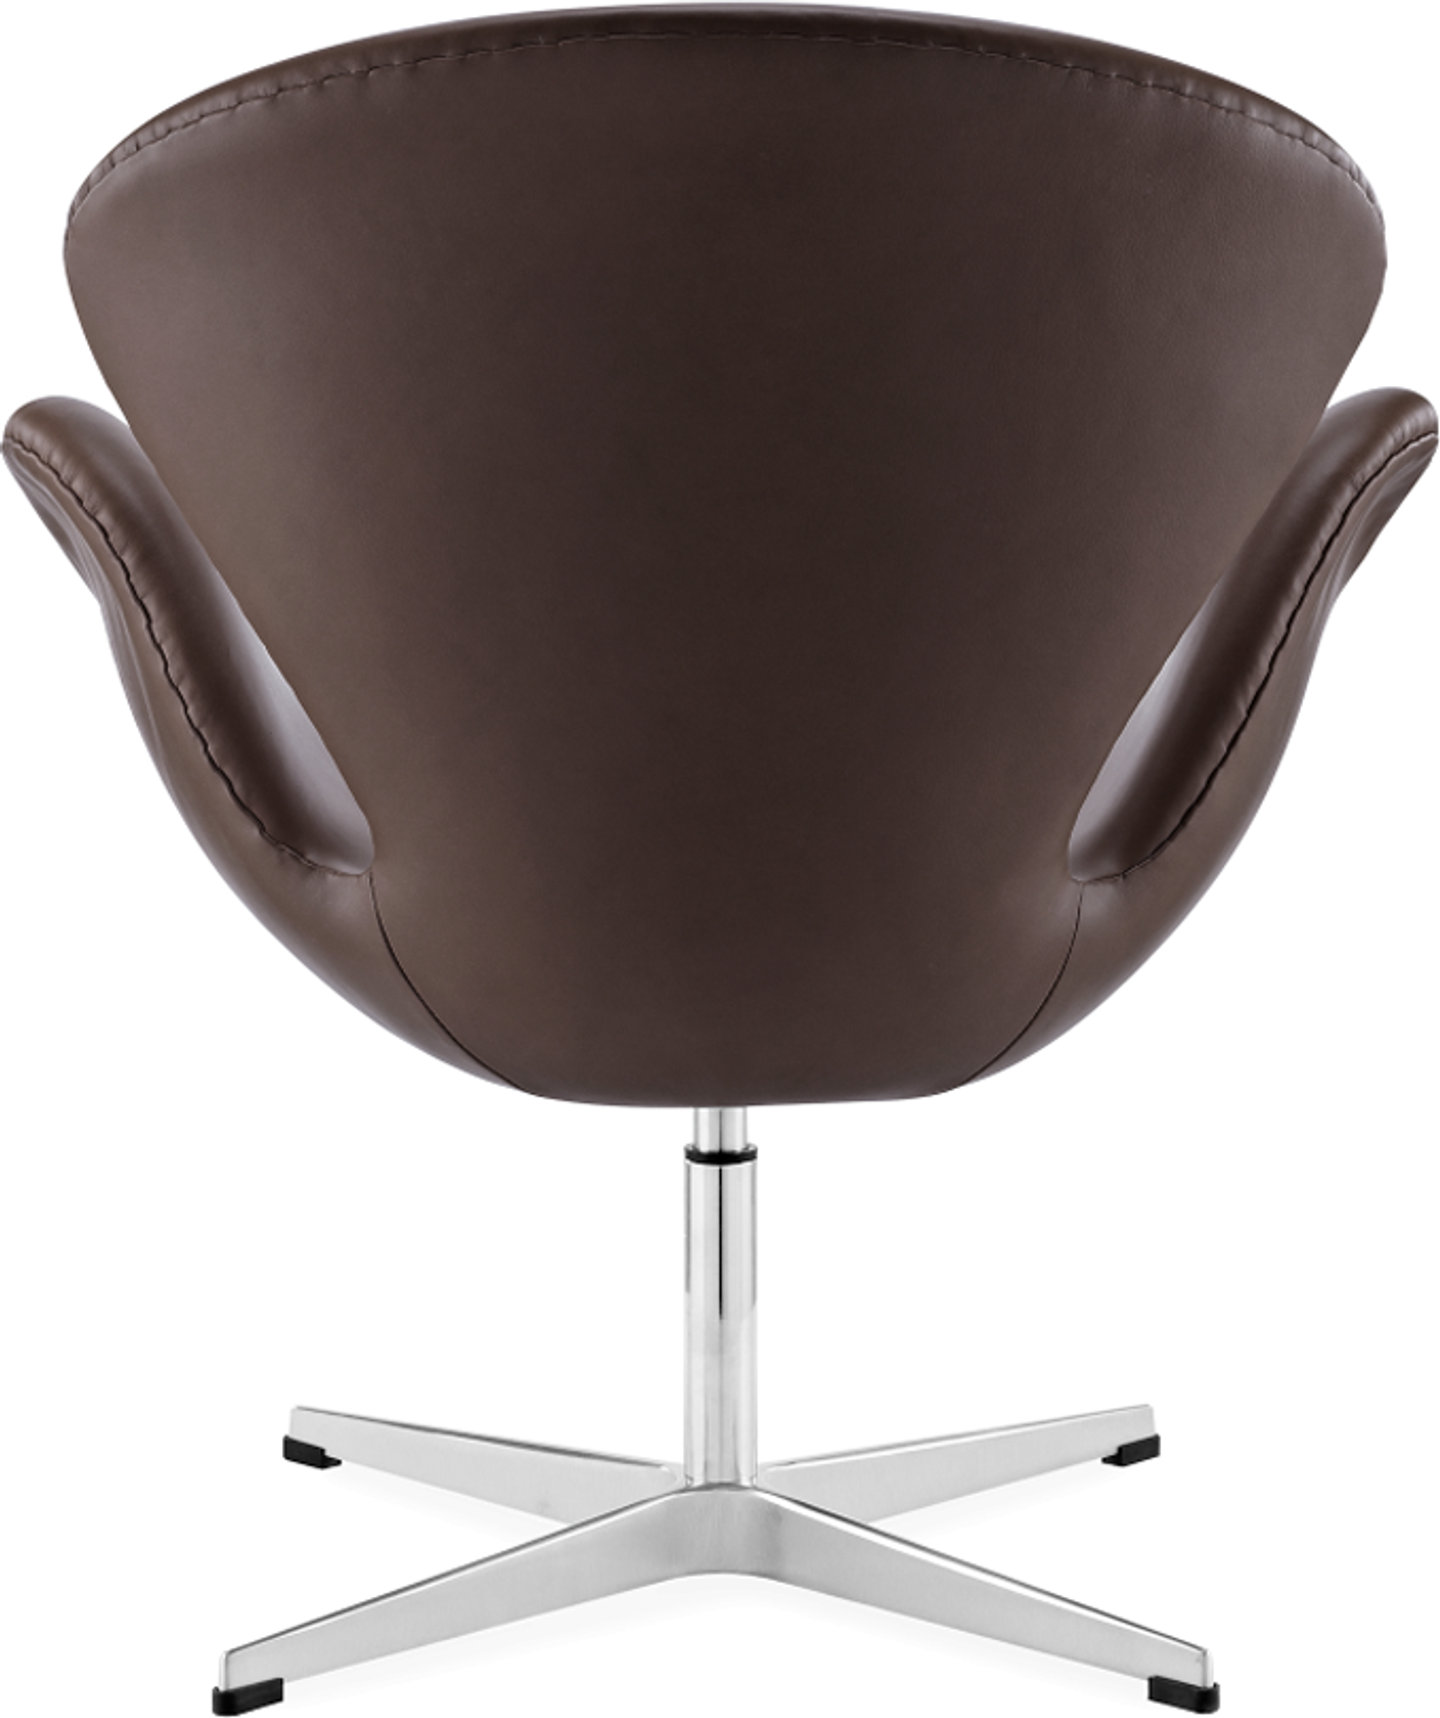 Le fauteuil du cygne Premium Leather/Without piping/Mocha image.